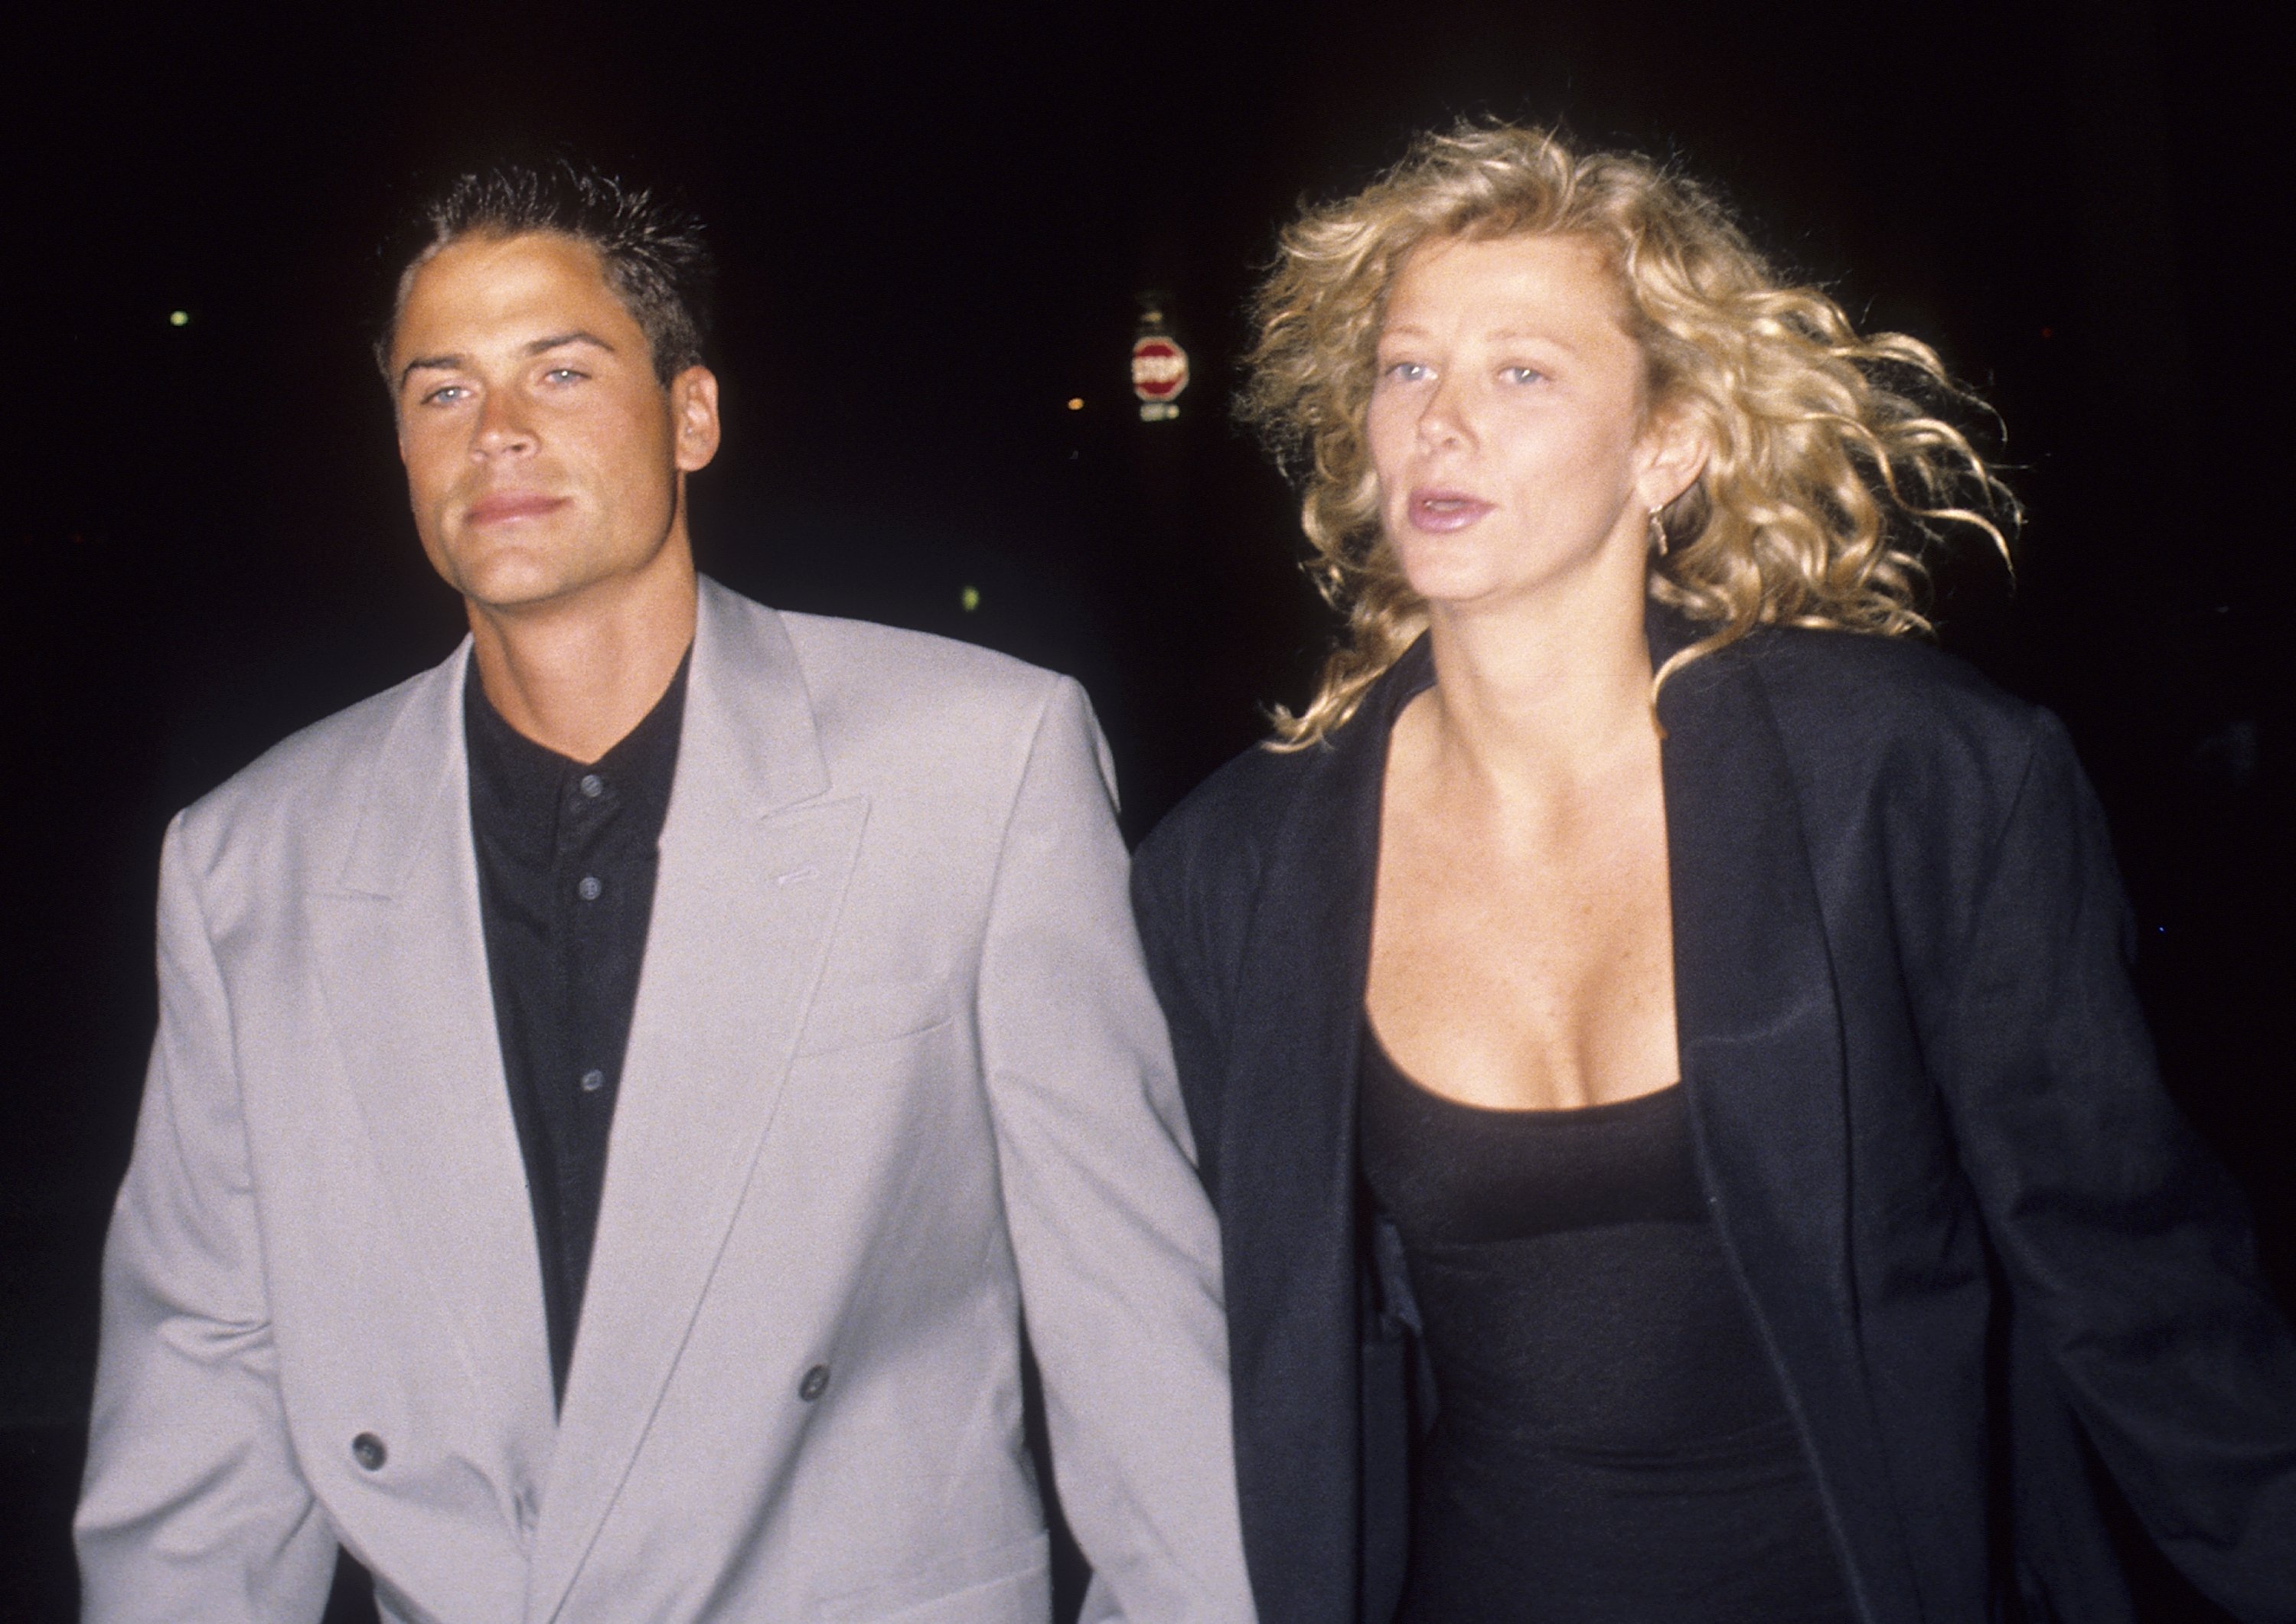 Lowe and Berkoff attend the "Wild at Heart" Universal City Premiere in Universal City, California in 1990. | Source: Getty Images